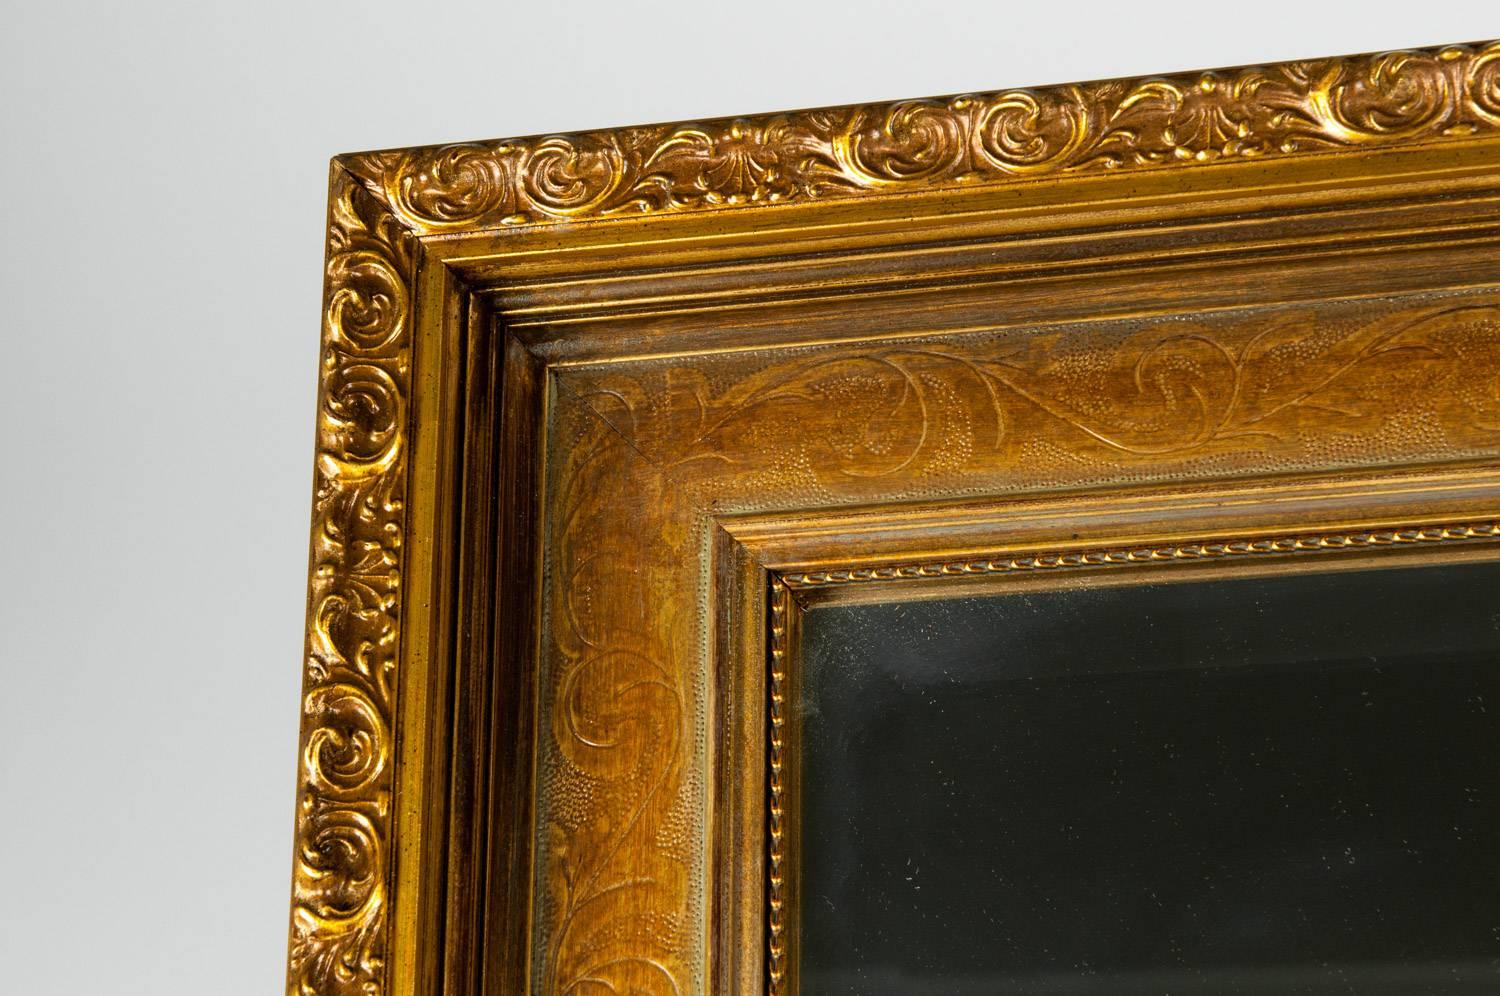 Vintage gilded wood framed hanging wall mantel / fireplace decorative bevelled mirror. The mirror measure about 58 inches long x 38 inches width x 2 inches deep.